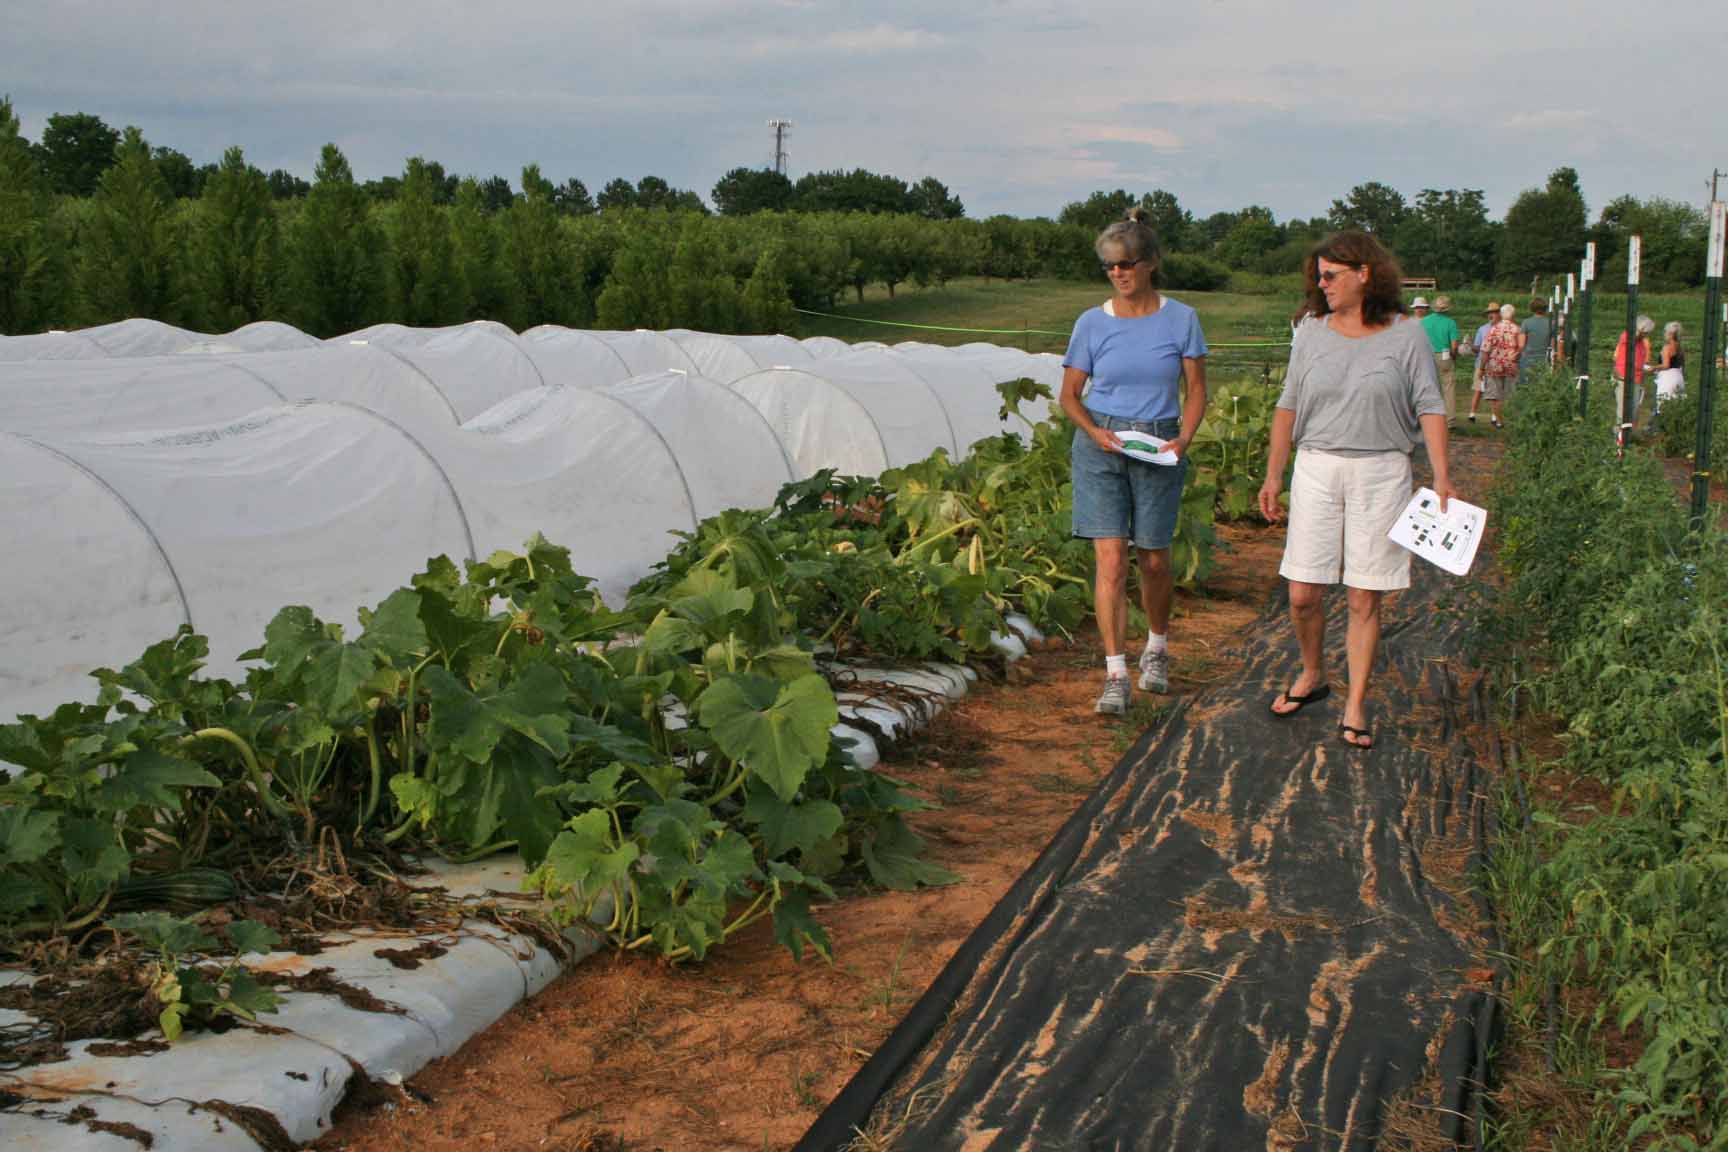 Two women tour the organic production plots at UGA's Durham Horticulture Farm during UGA's 2014 Organic Twilight Tour.